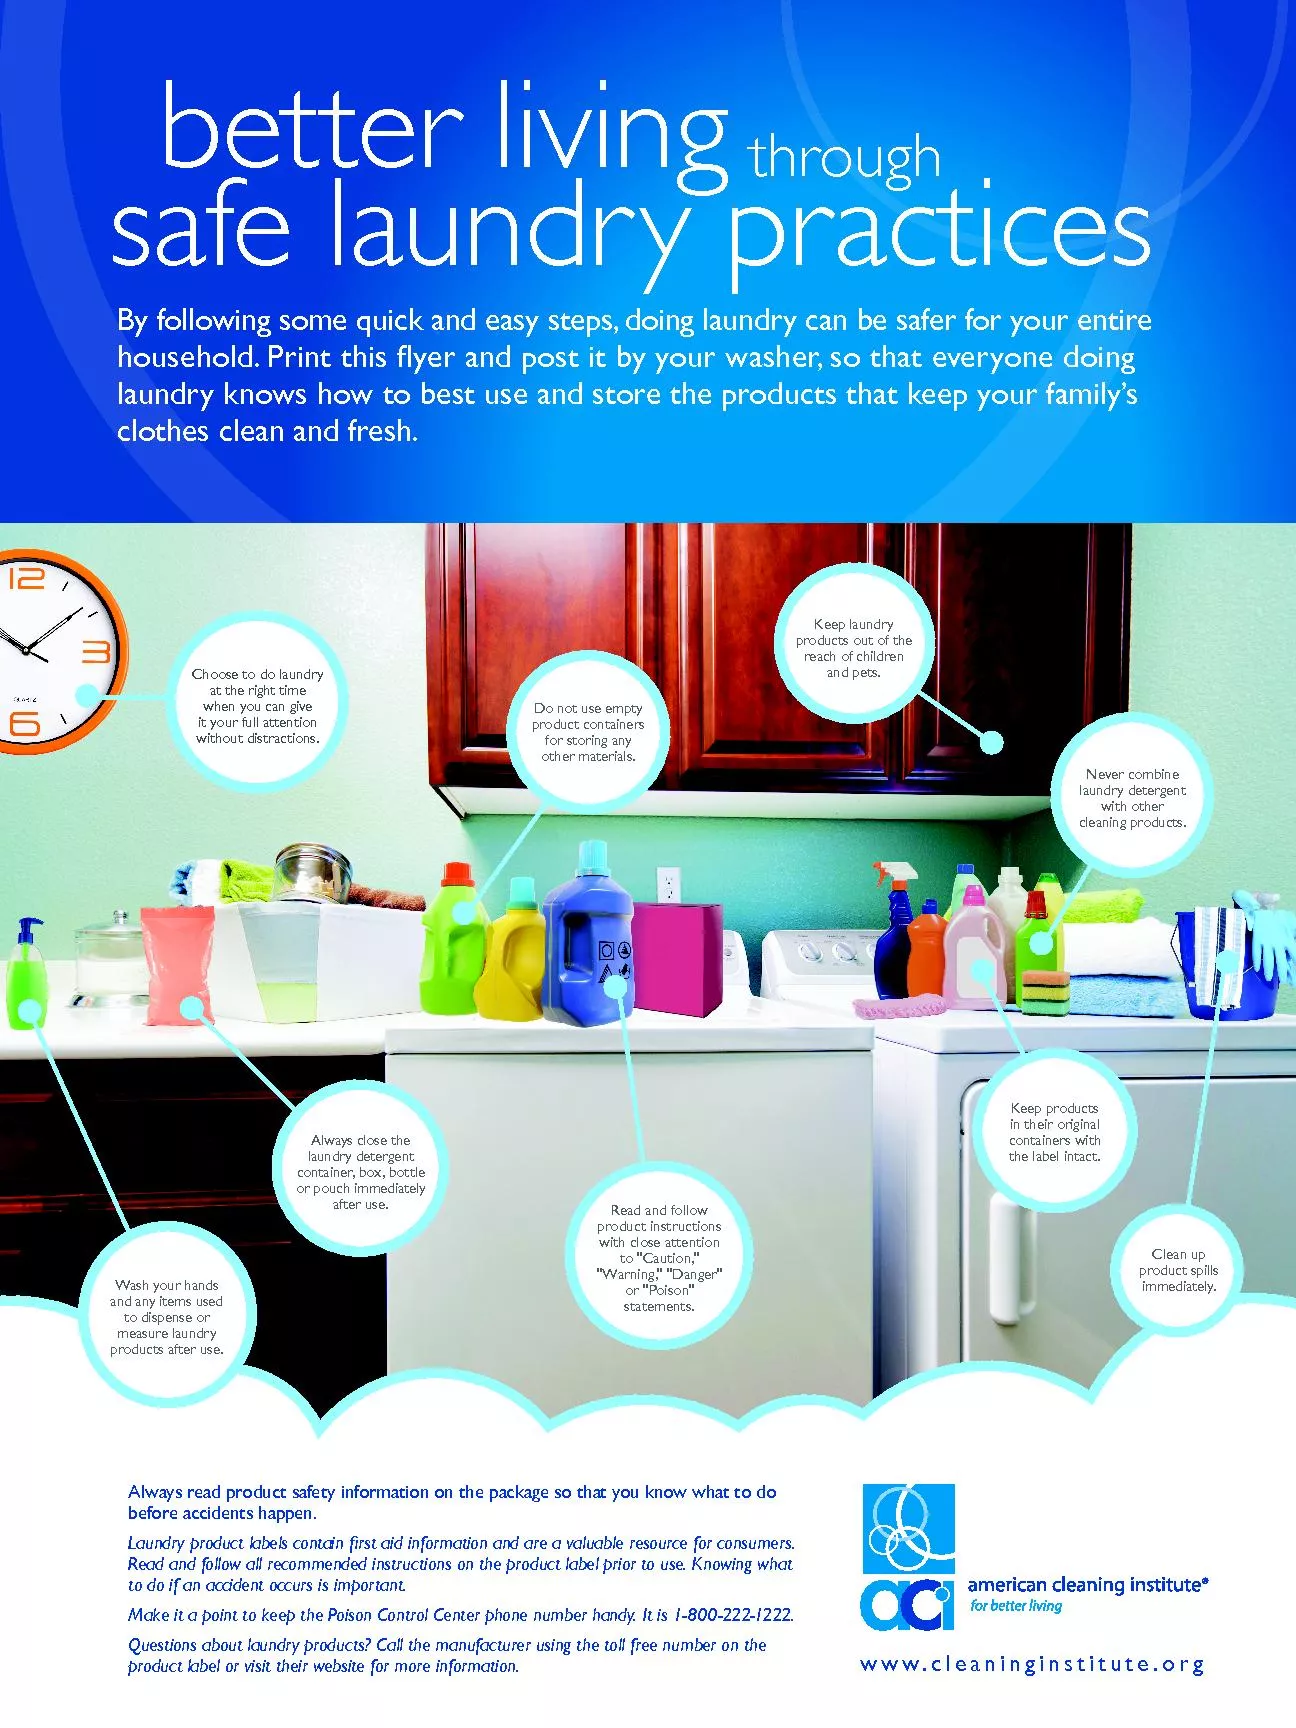 By following some quick and easy steps, doing laundry can be safer for